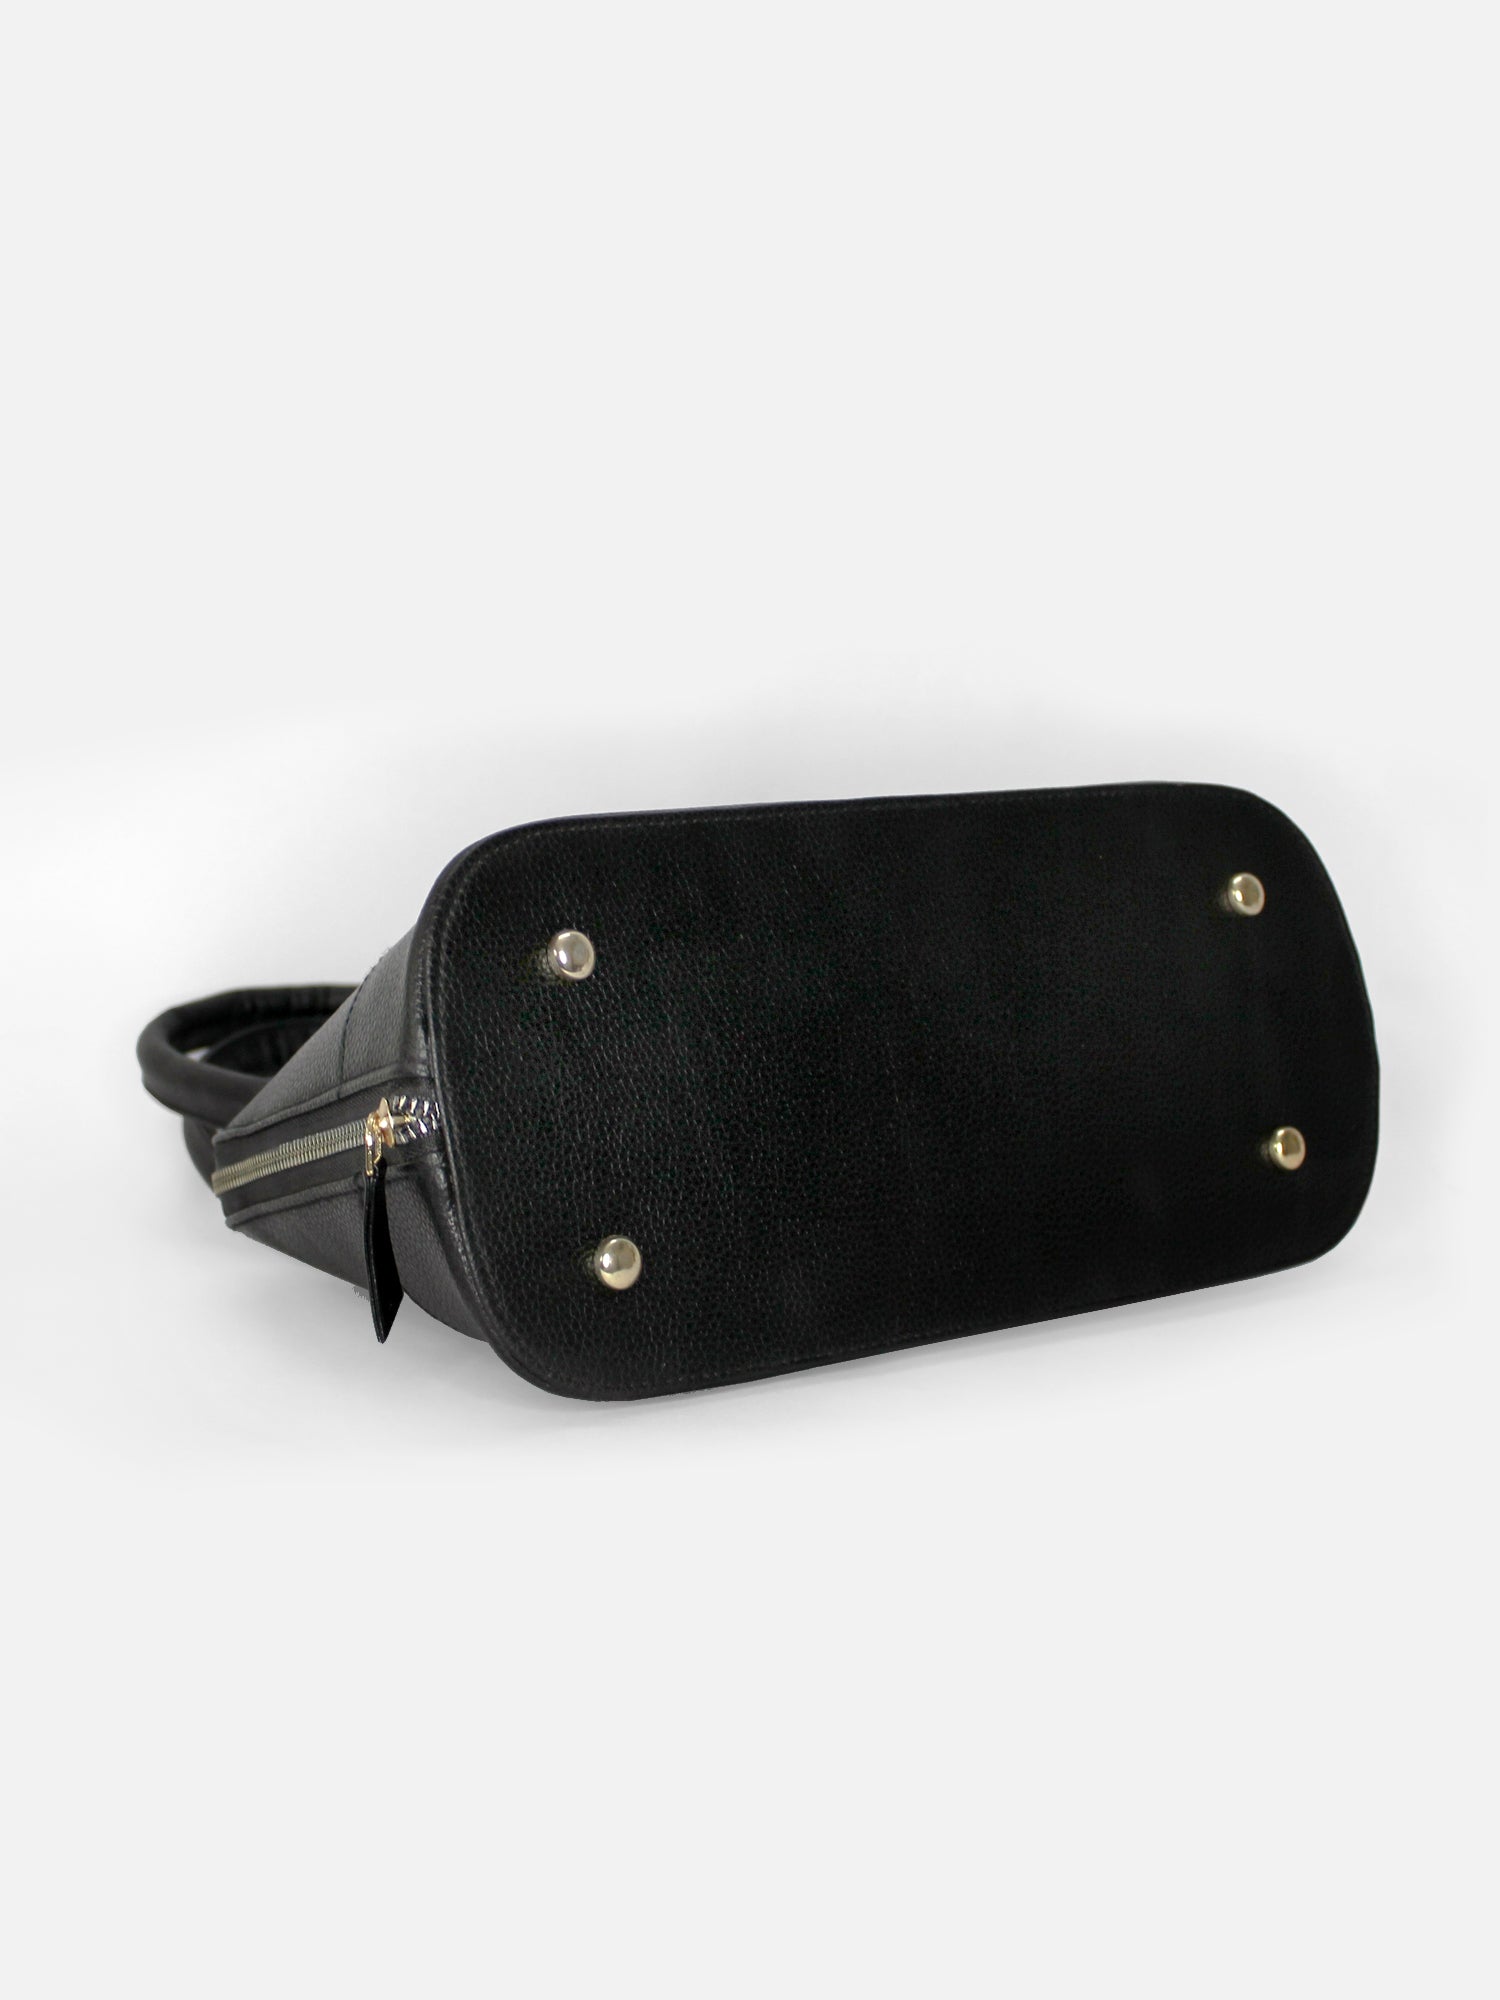 Women's Black Purse Pouch Bag with Adjustable Strap | eBay